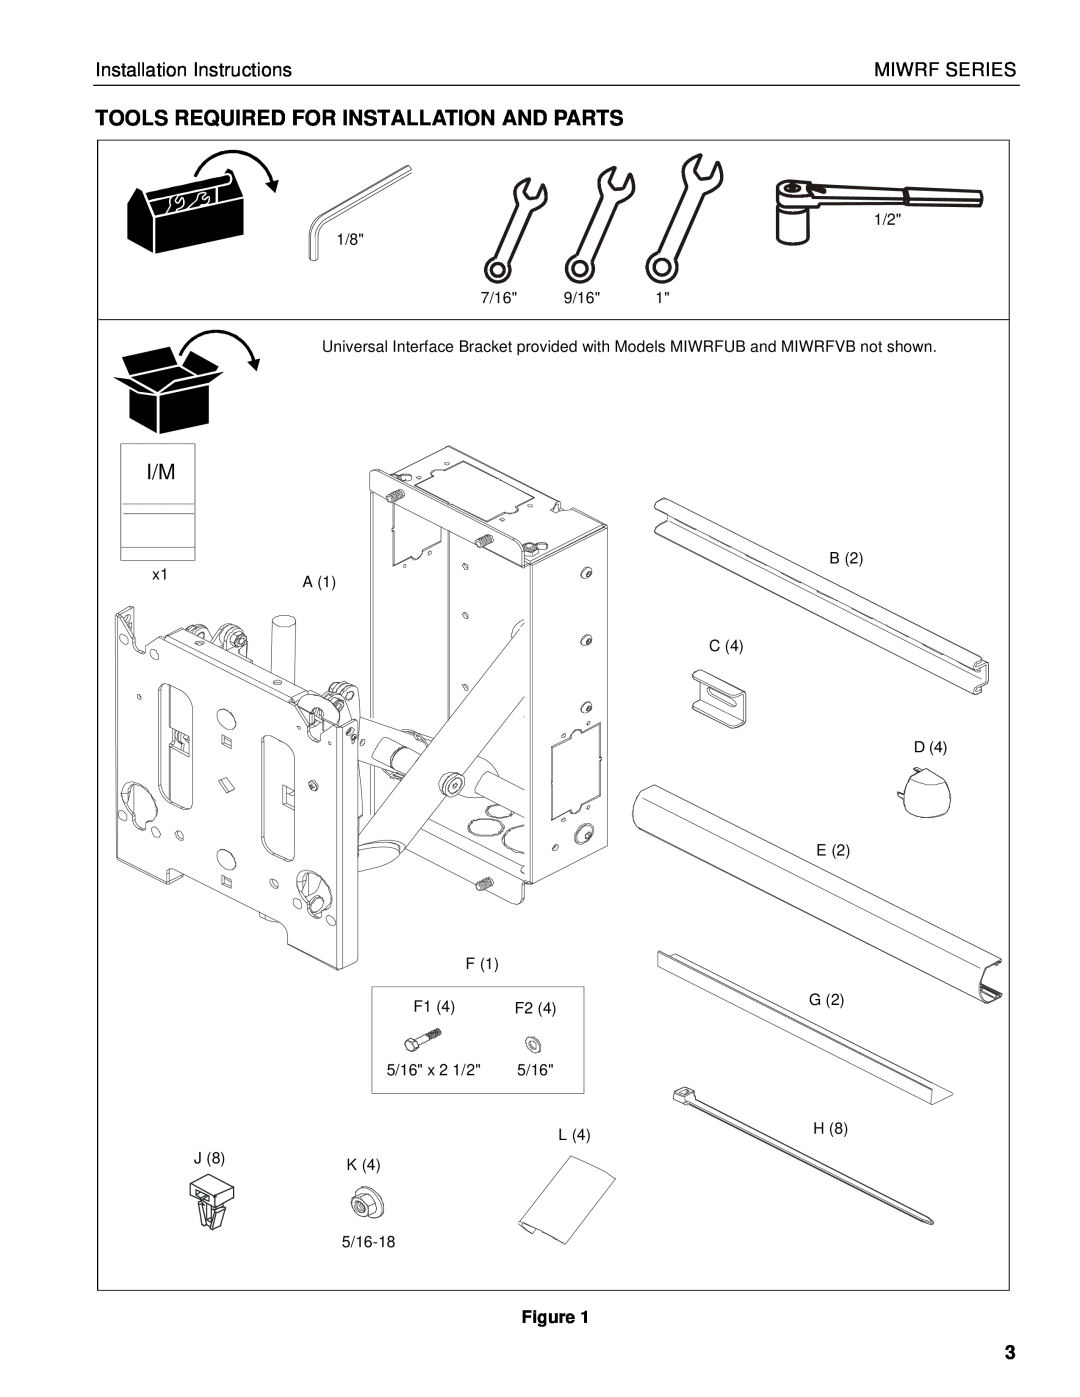 Chief Manufacturing MIWRF Series Tools Required For Installation And Parts, Installation Instructions, Miwrf Series 